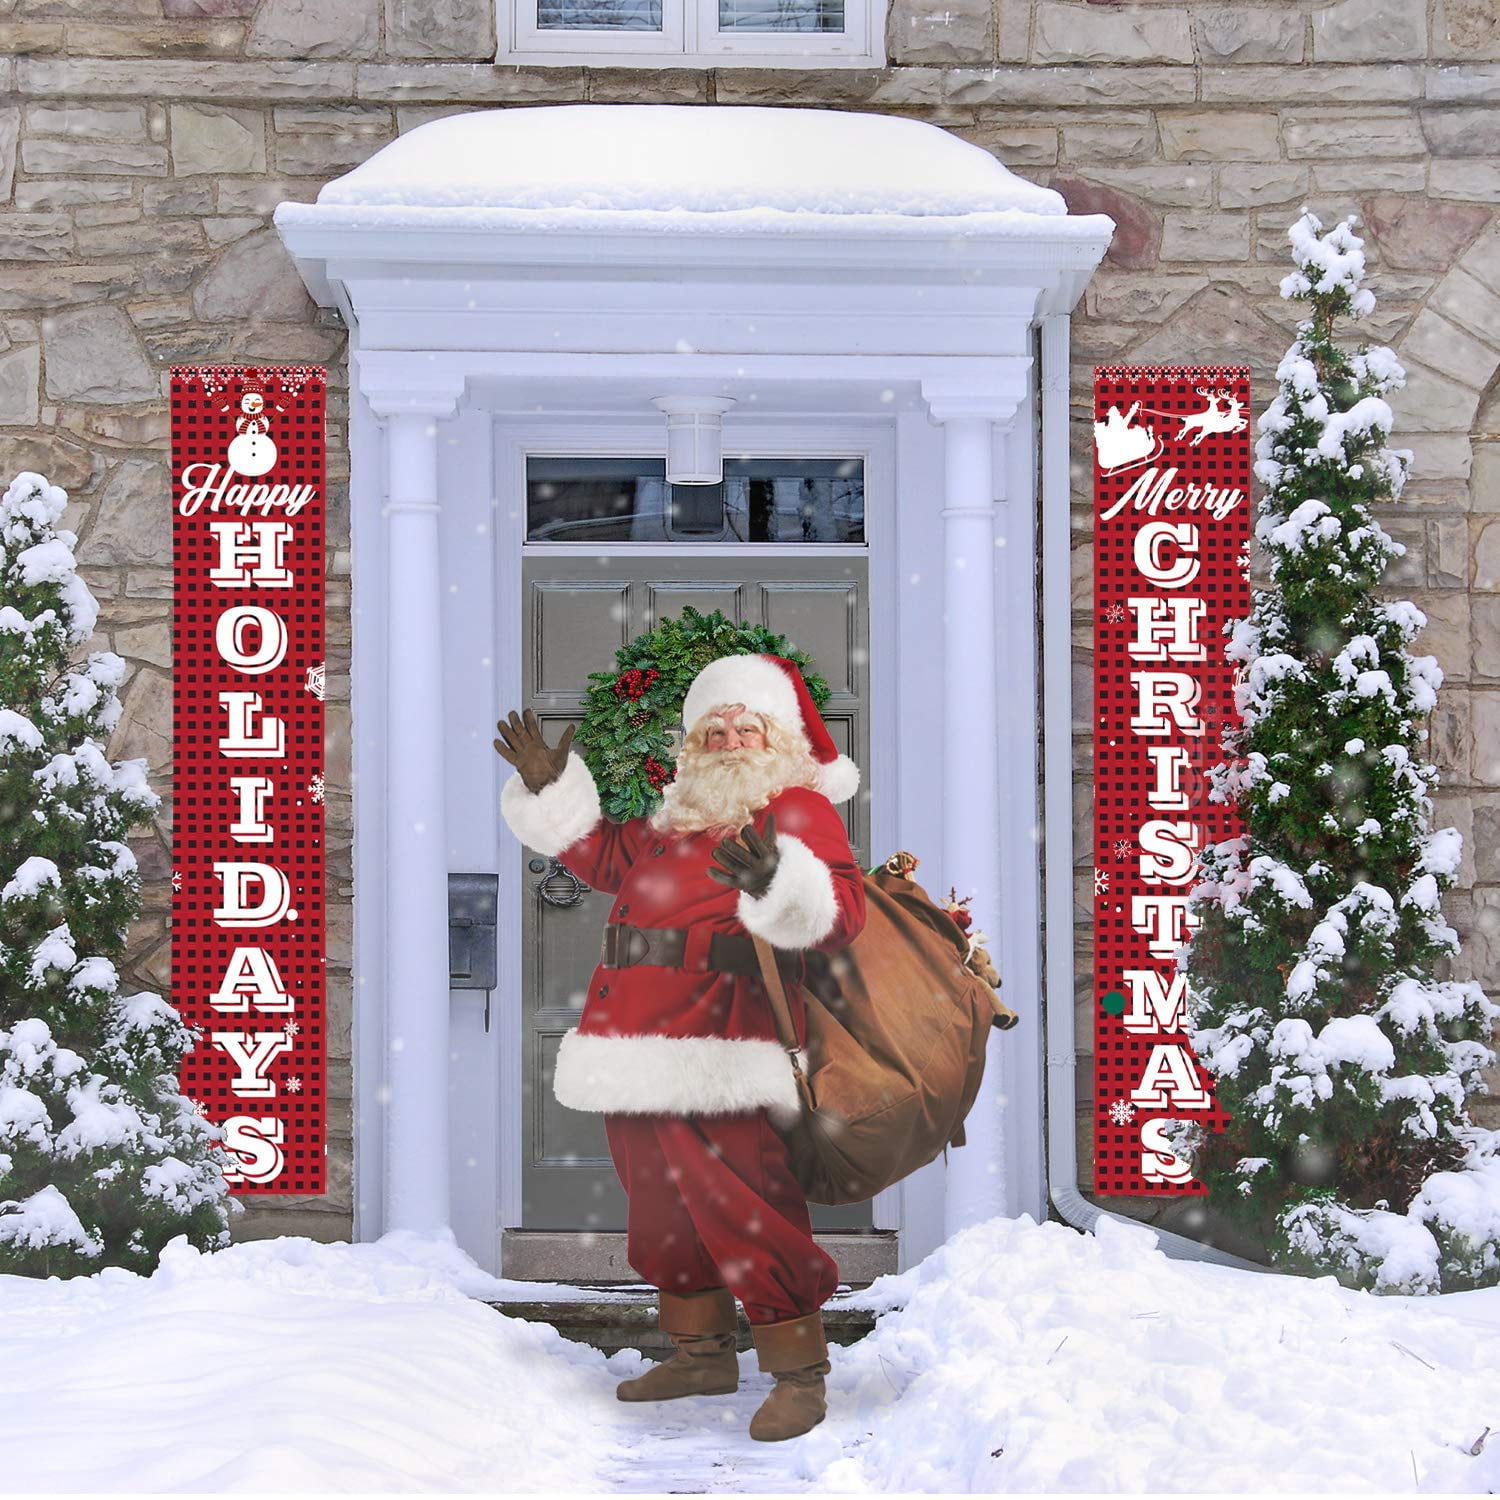 Details about   Merry Christmas Outdoor Banner Santa Claus Christmas Decorations Home Xmas Decor